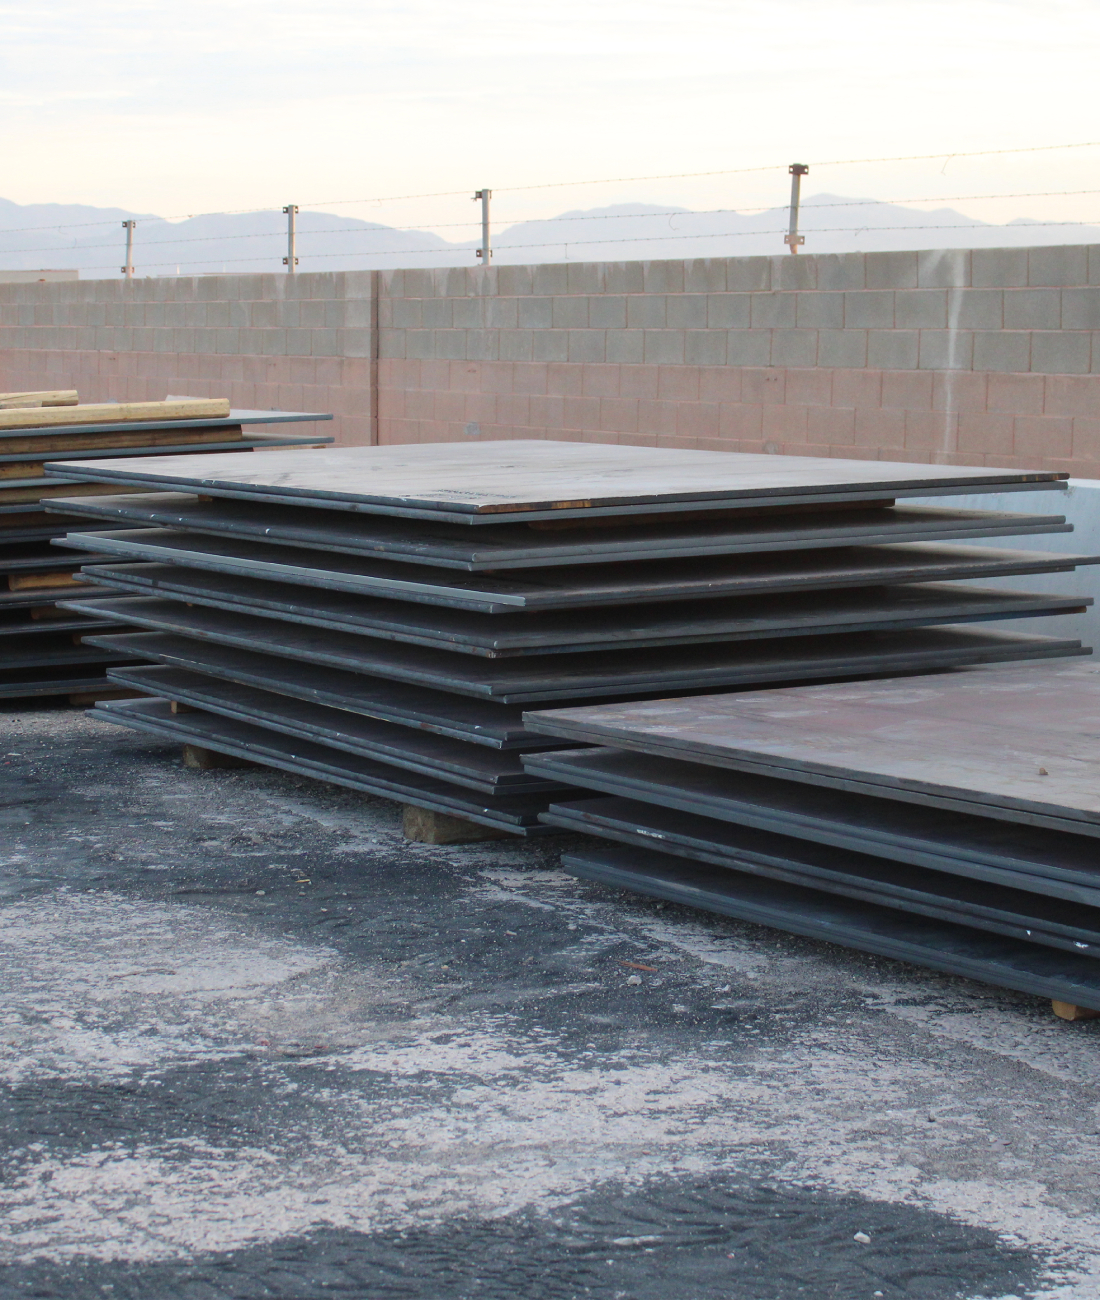 Steel trench plates stored in storage yard